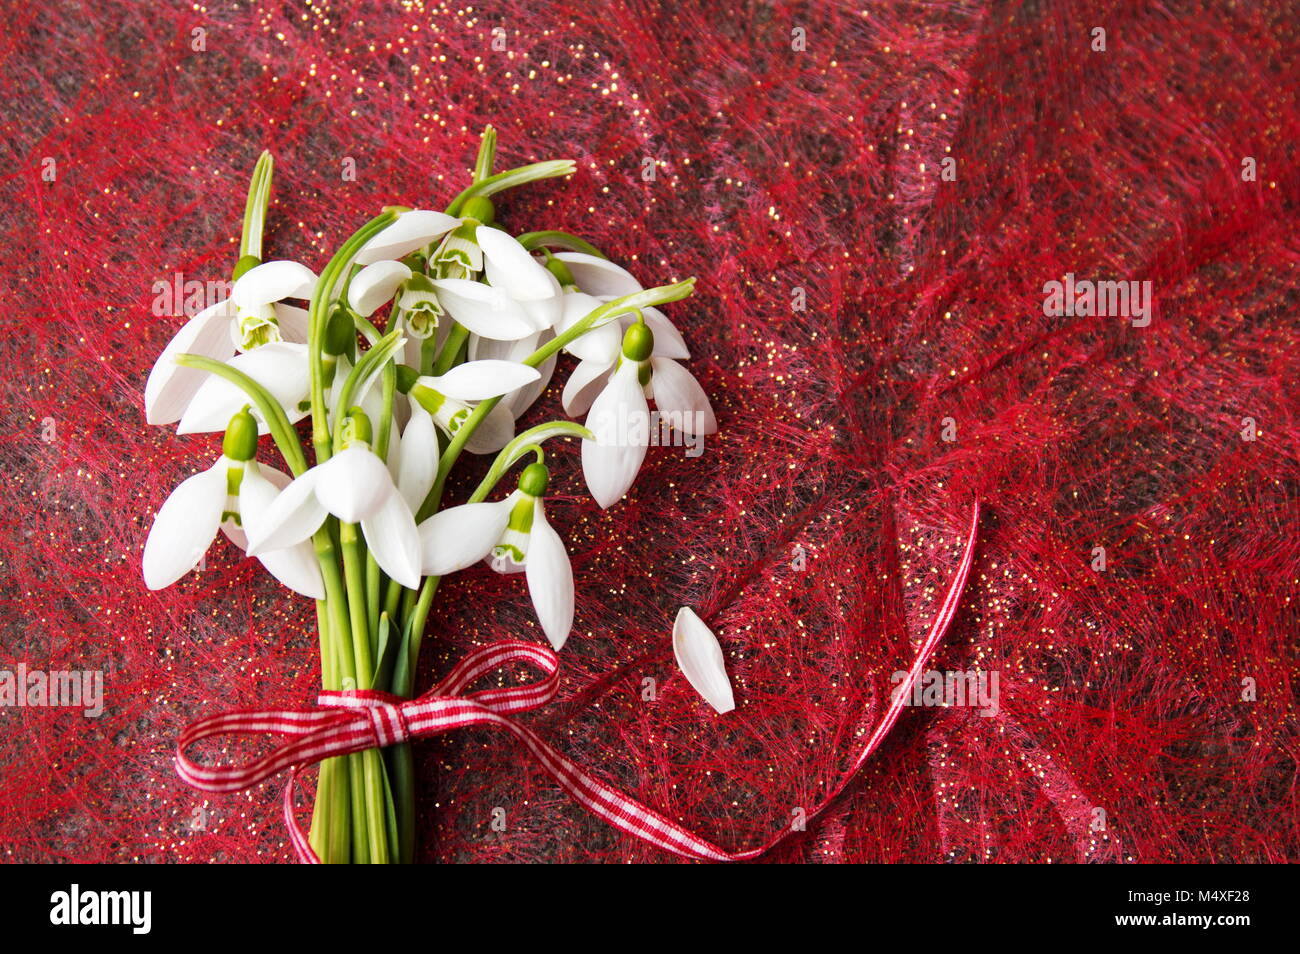 Fresh snowdrops buquet on red shiny background Stock Photo